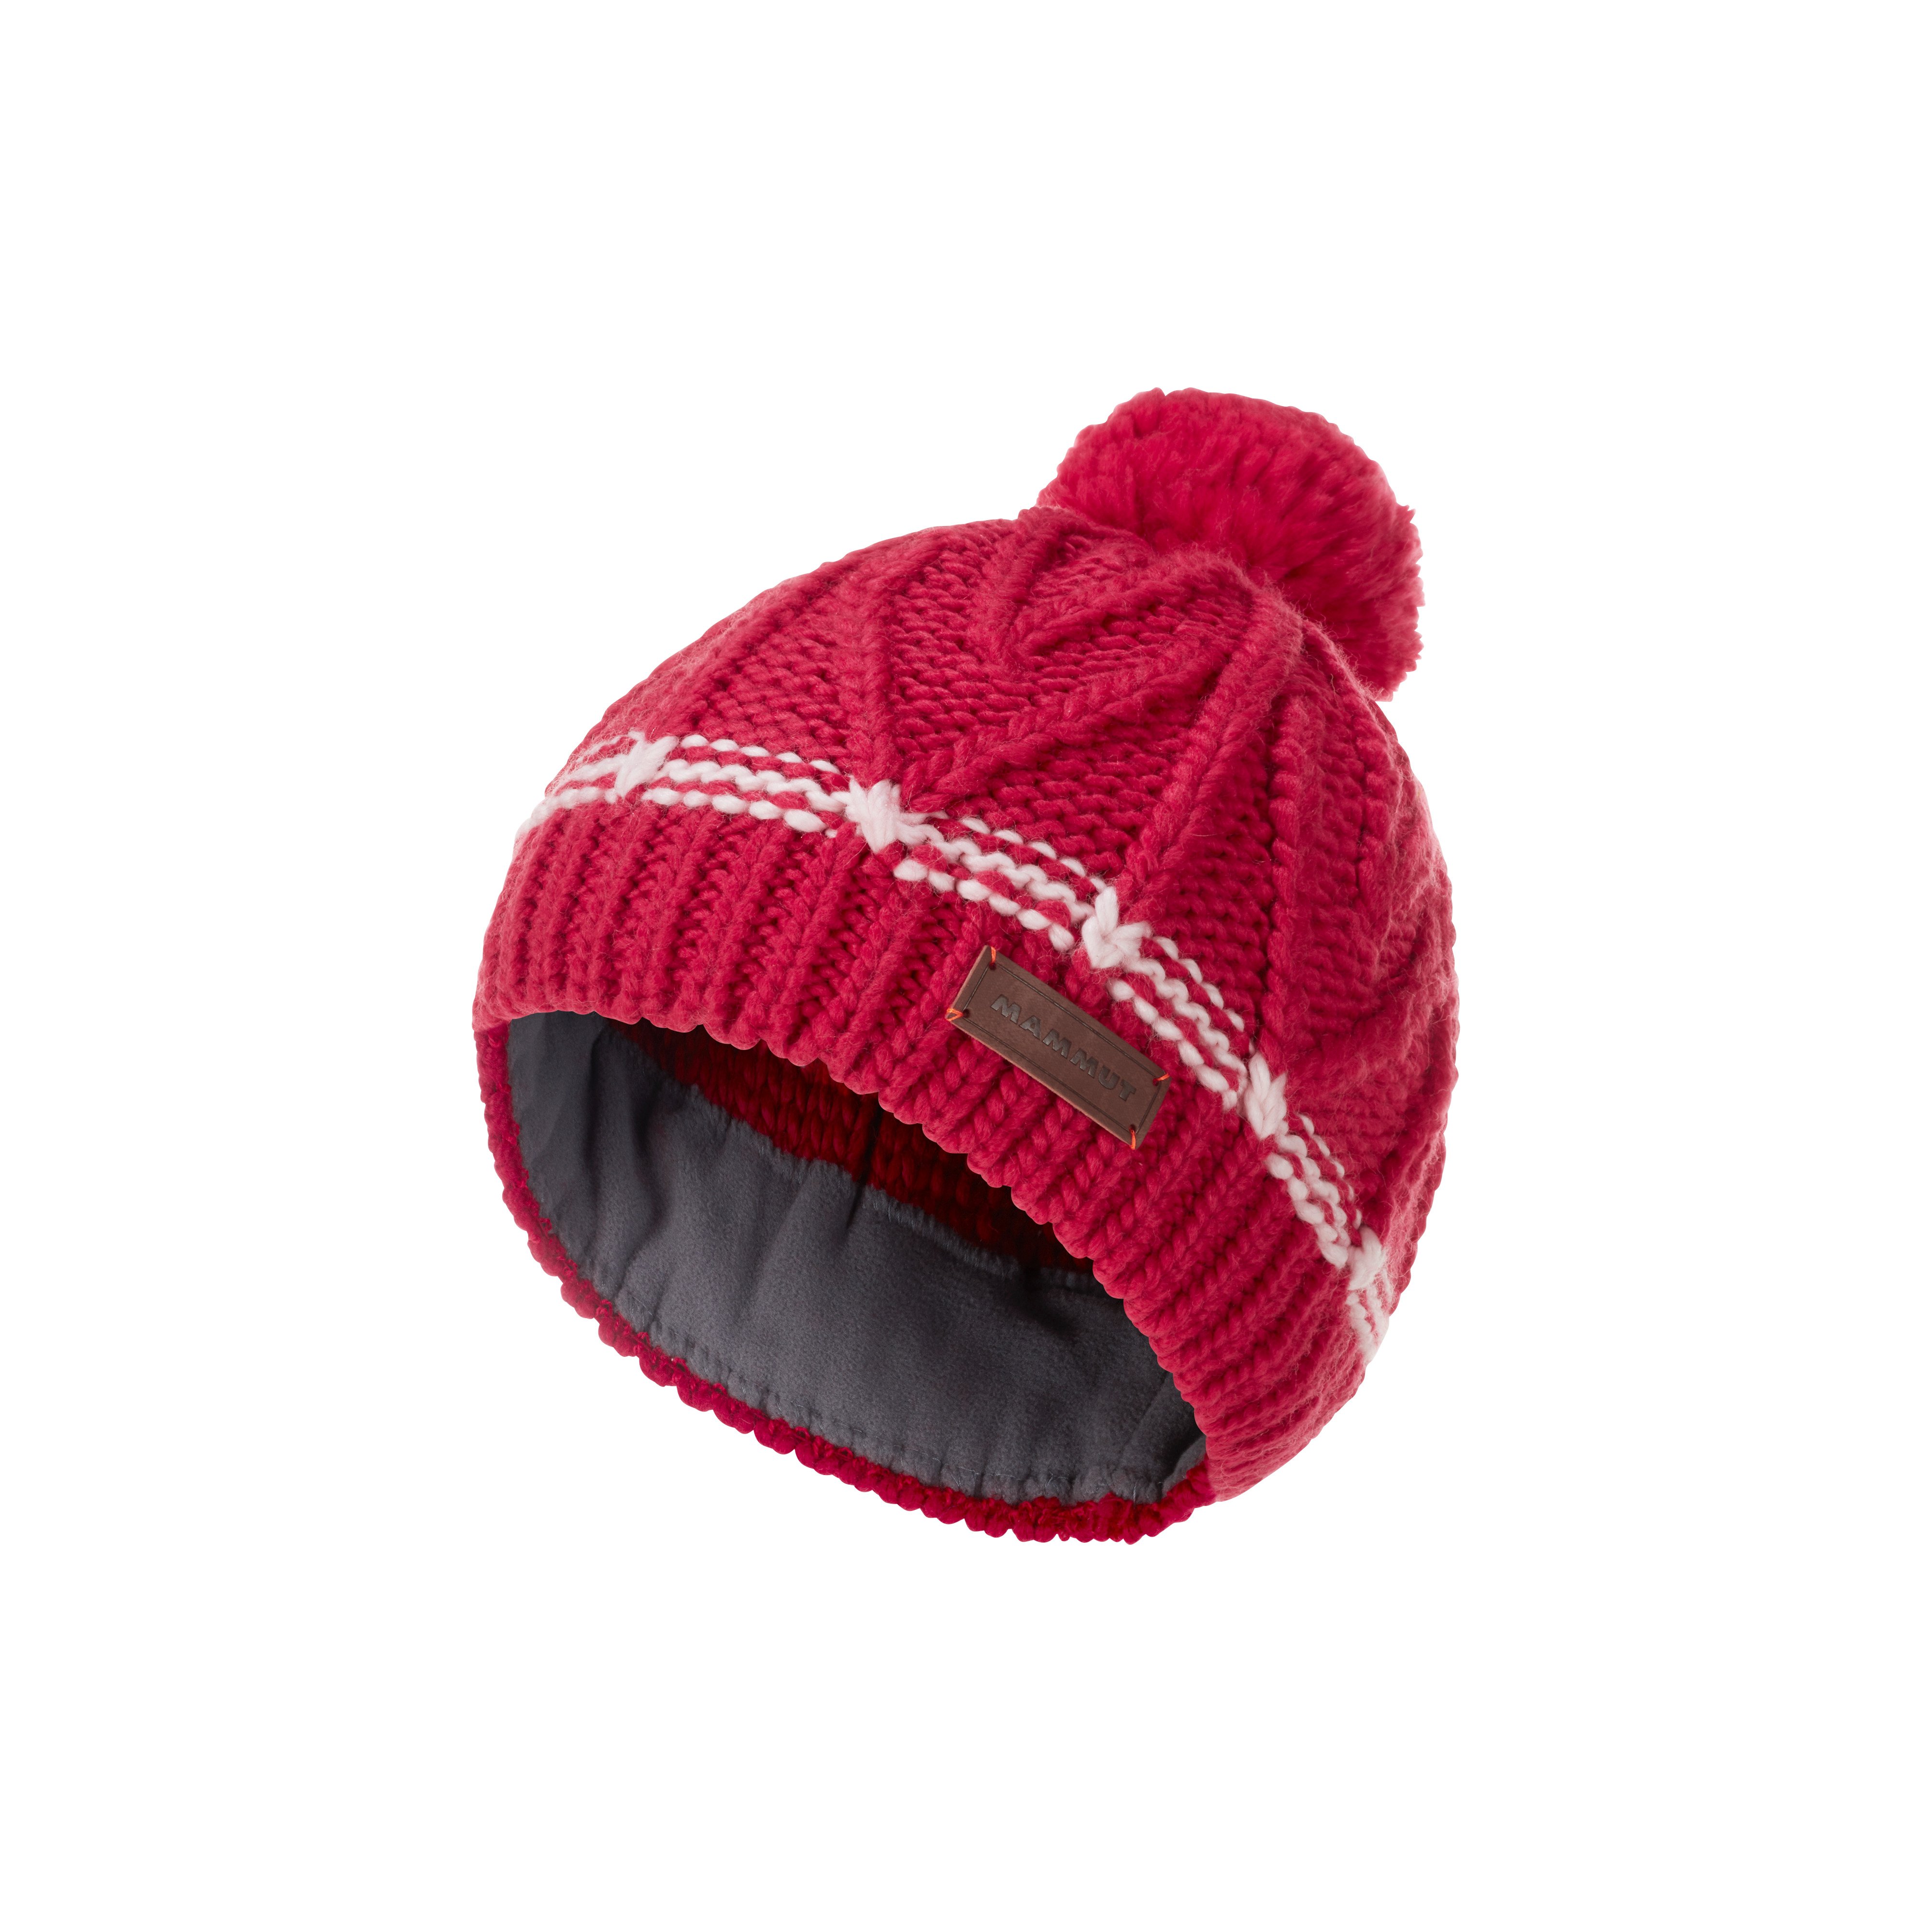 Sally Beanie - dragon fruit, one size product image